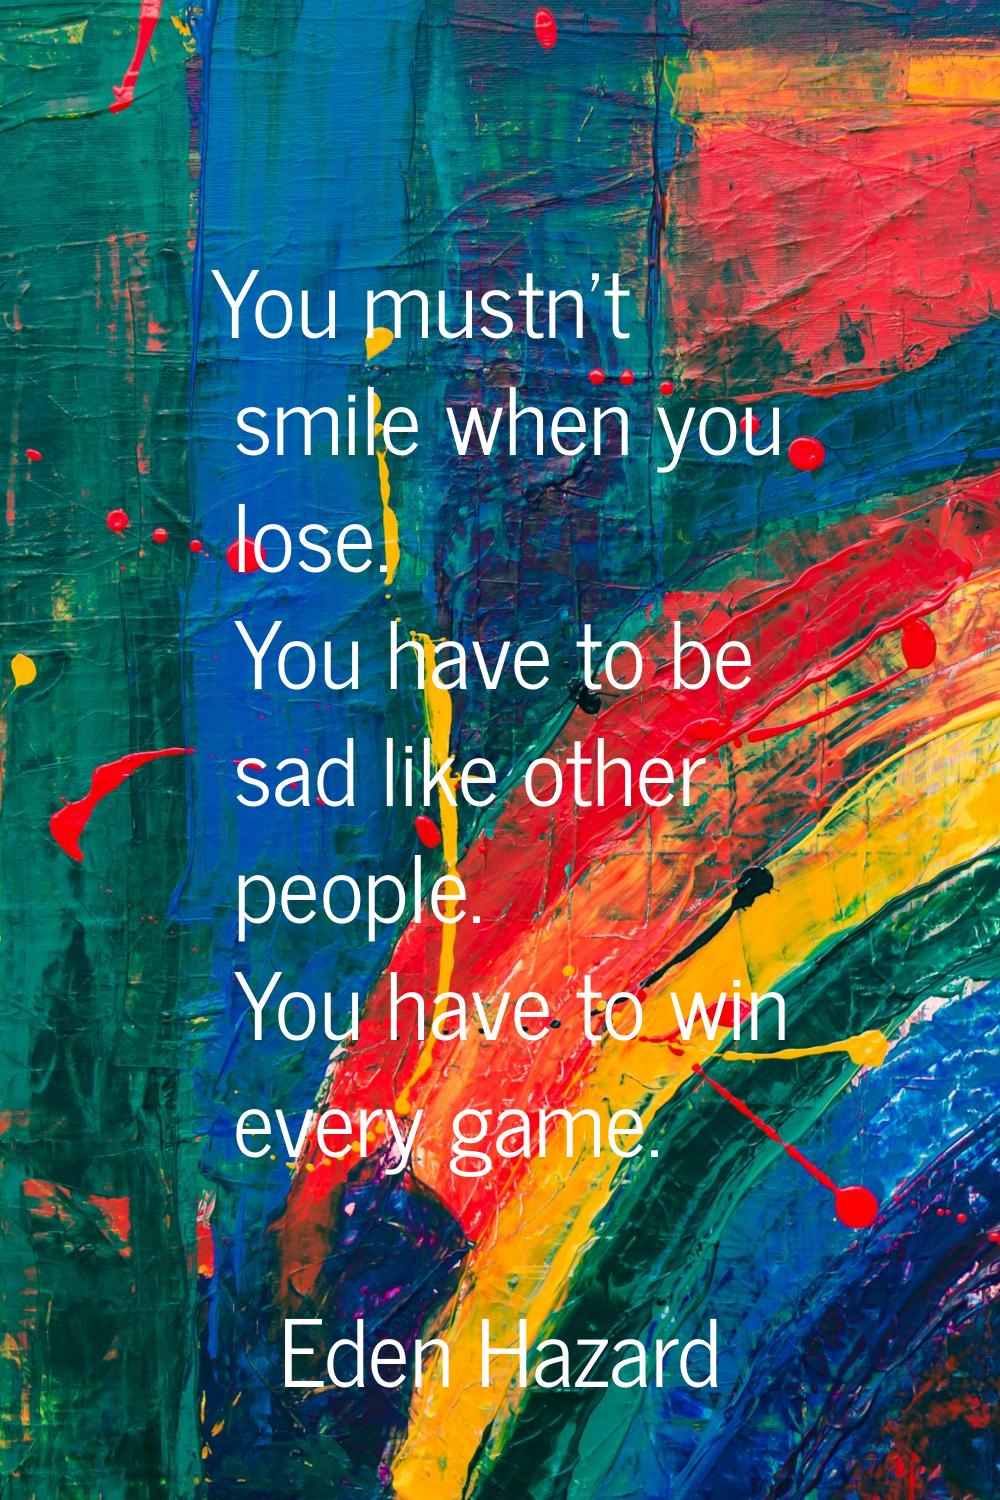 You mustn't smile when you lose. You have to be sad like other people. You have to win every game.